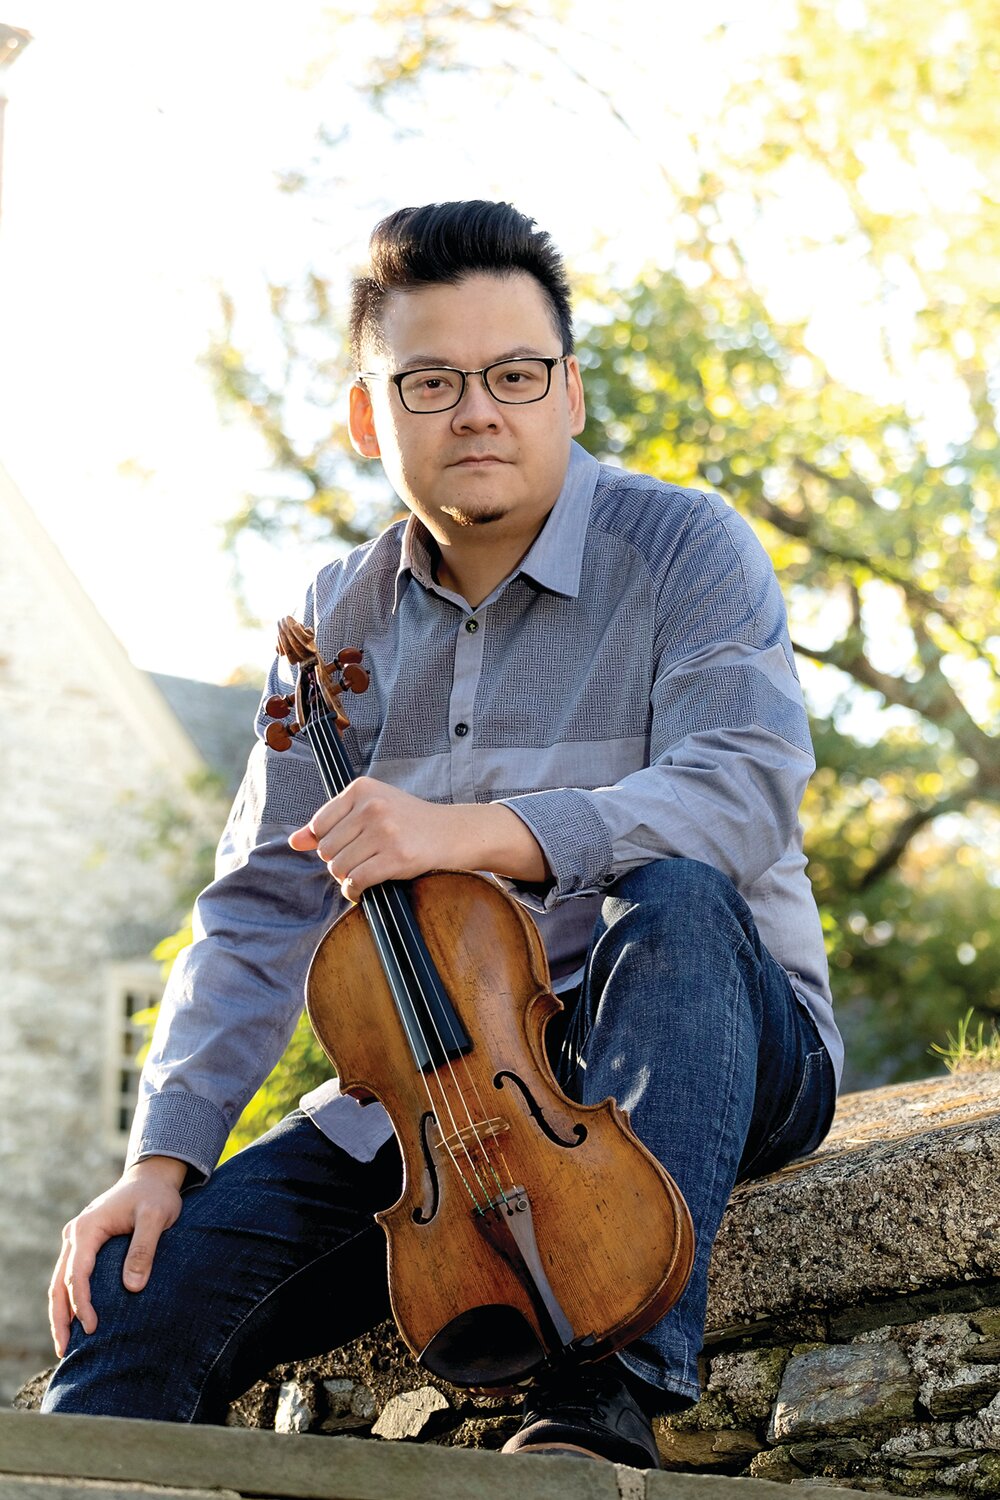 Che-Hung Chen is a violist with the Philadelphia Orchestra.